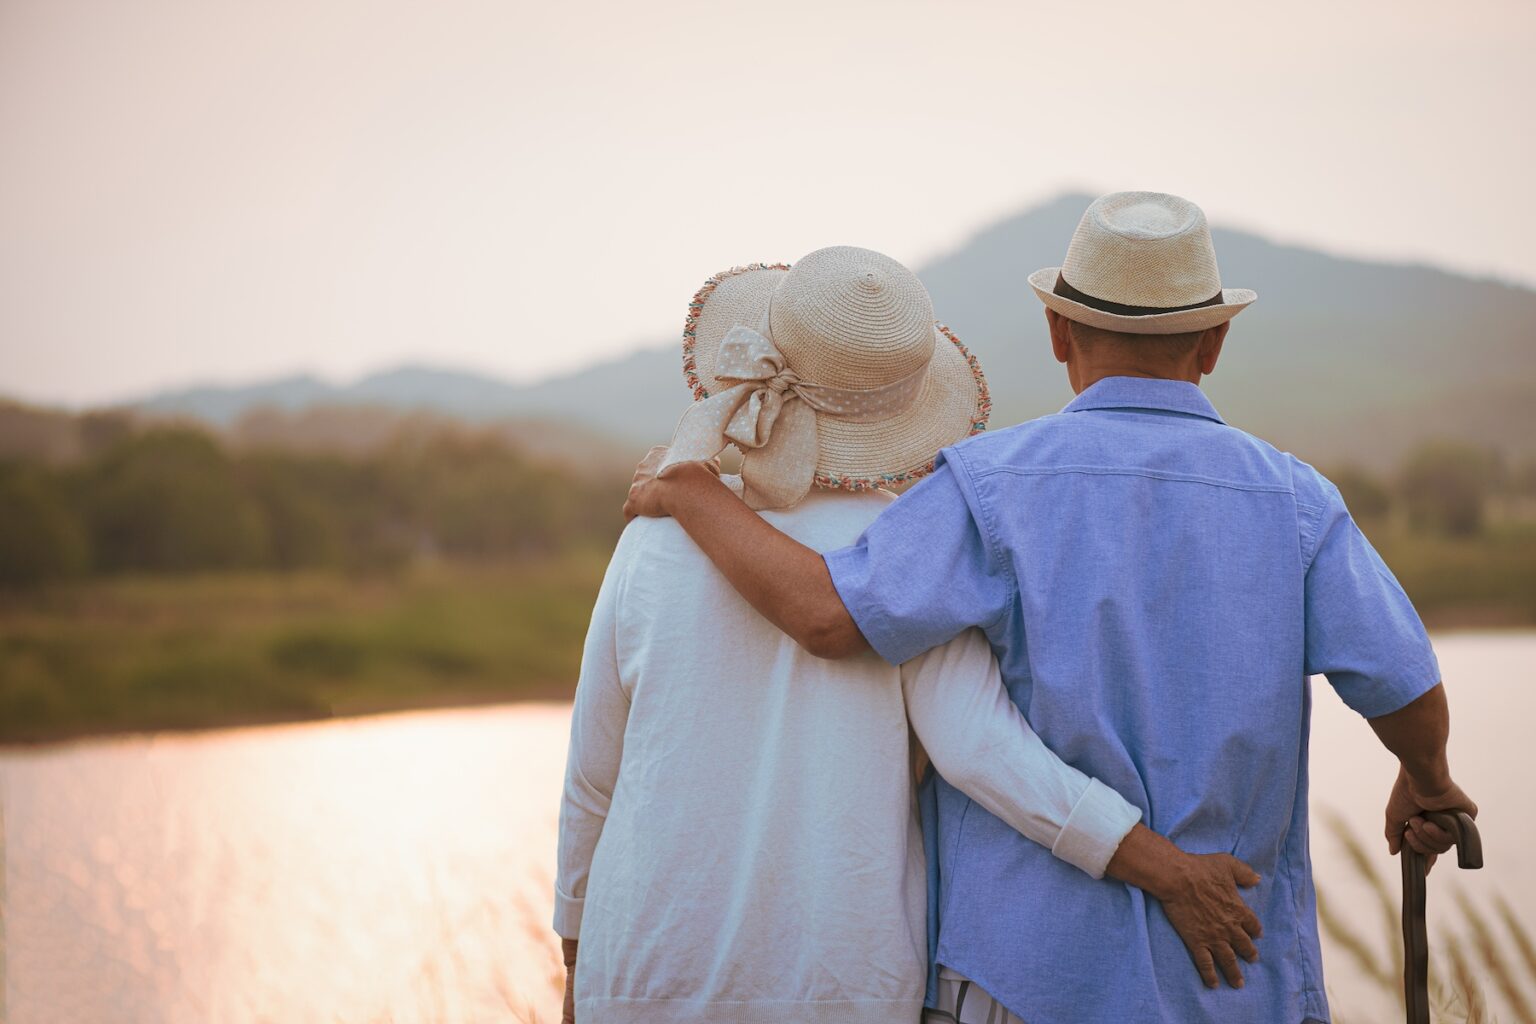 An older couple stands with arms around each other looking out over a natural landscape